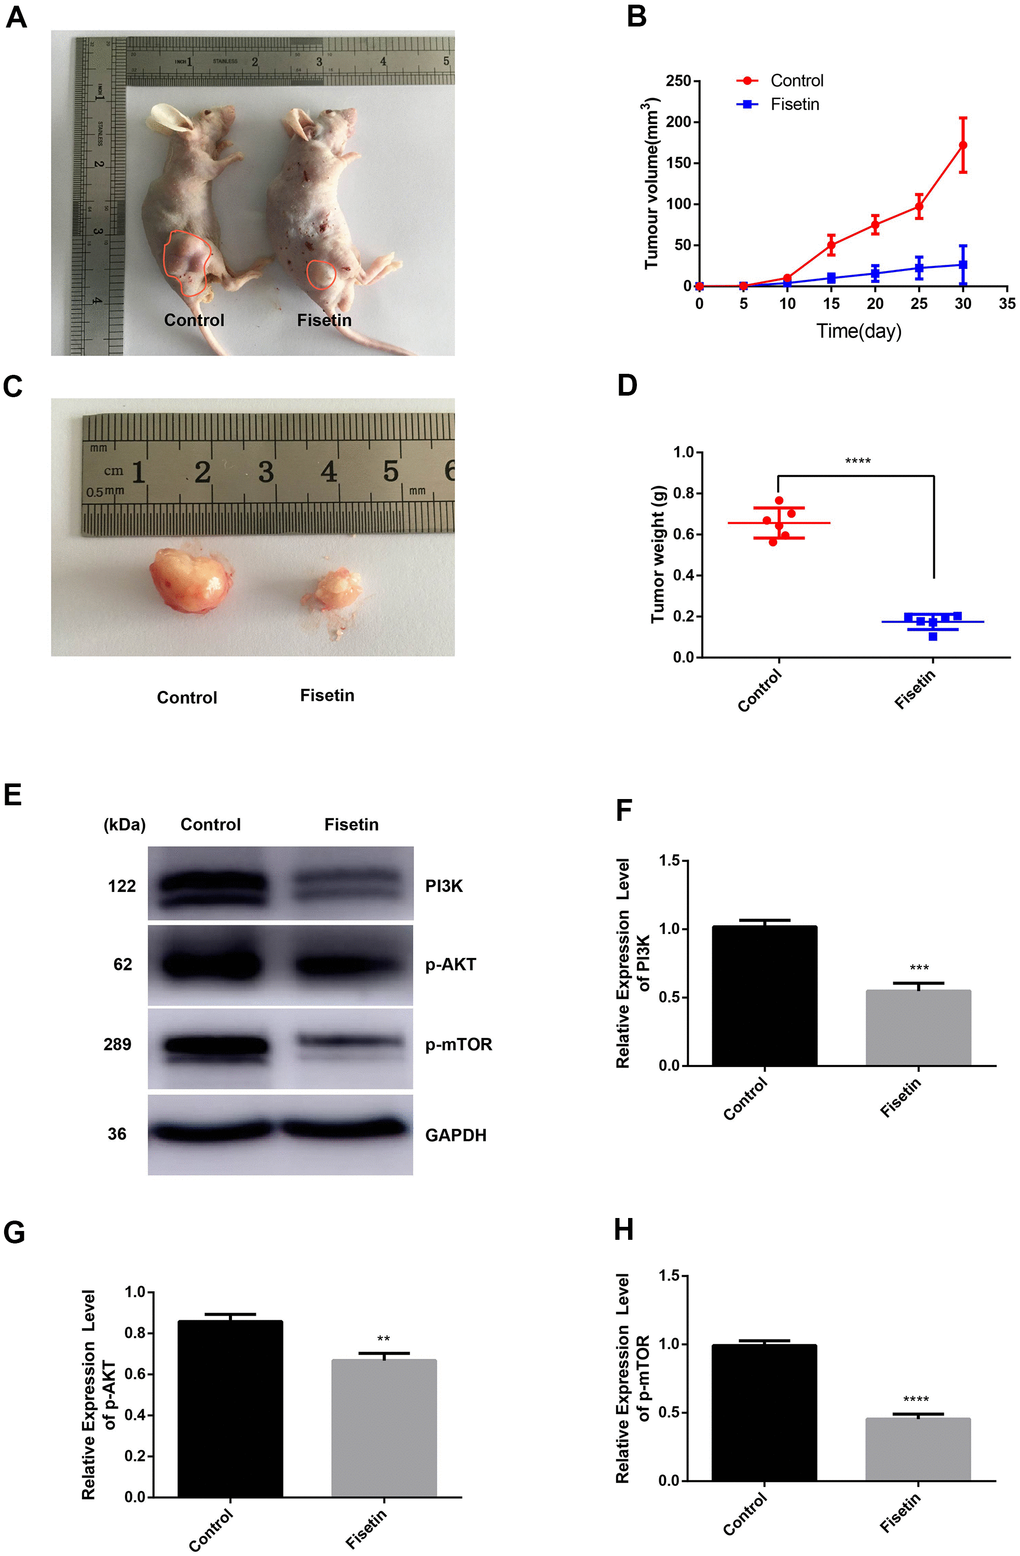 Fisetin dampens the growth of pancreatic cancer in vivo. (A, C) Nude mice were subcutaneously inoculated with PANC-1 cells. Following the end of the 30 days, mice along with the tumors were imaged. (B) Determination of tumor volume at specified time points; (D) Tumors were harvested after 30 days and their weight computed; (E) Western blot assessment of protein contents. (F) Histogram illustrating PI3K protein contents. (G) Histogram illustrating p-AKT protein contents. (H) Histogram illustrating p-mTOR protein contents. All experiments were replicated thrice and data are given as means±SD. **P